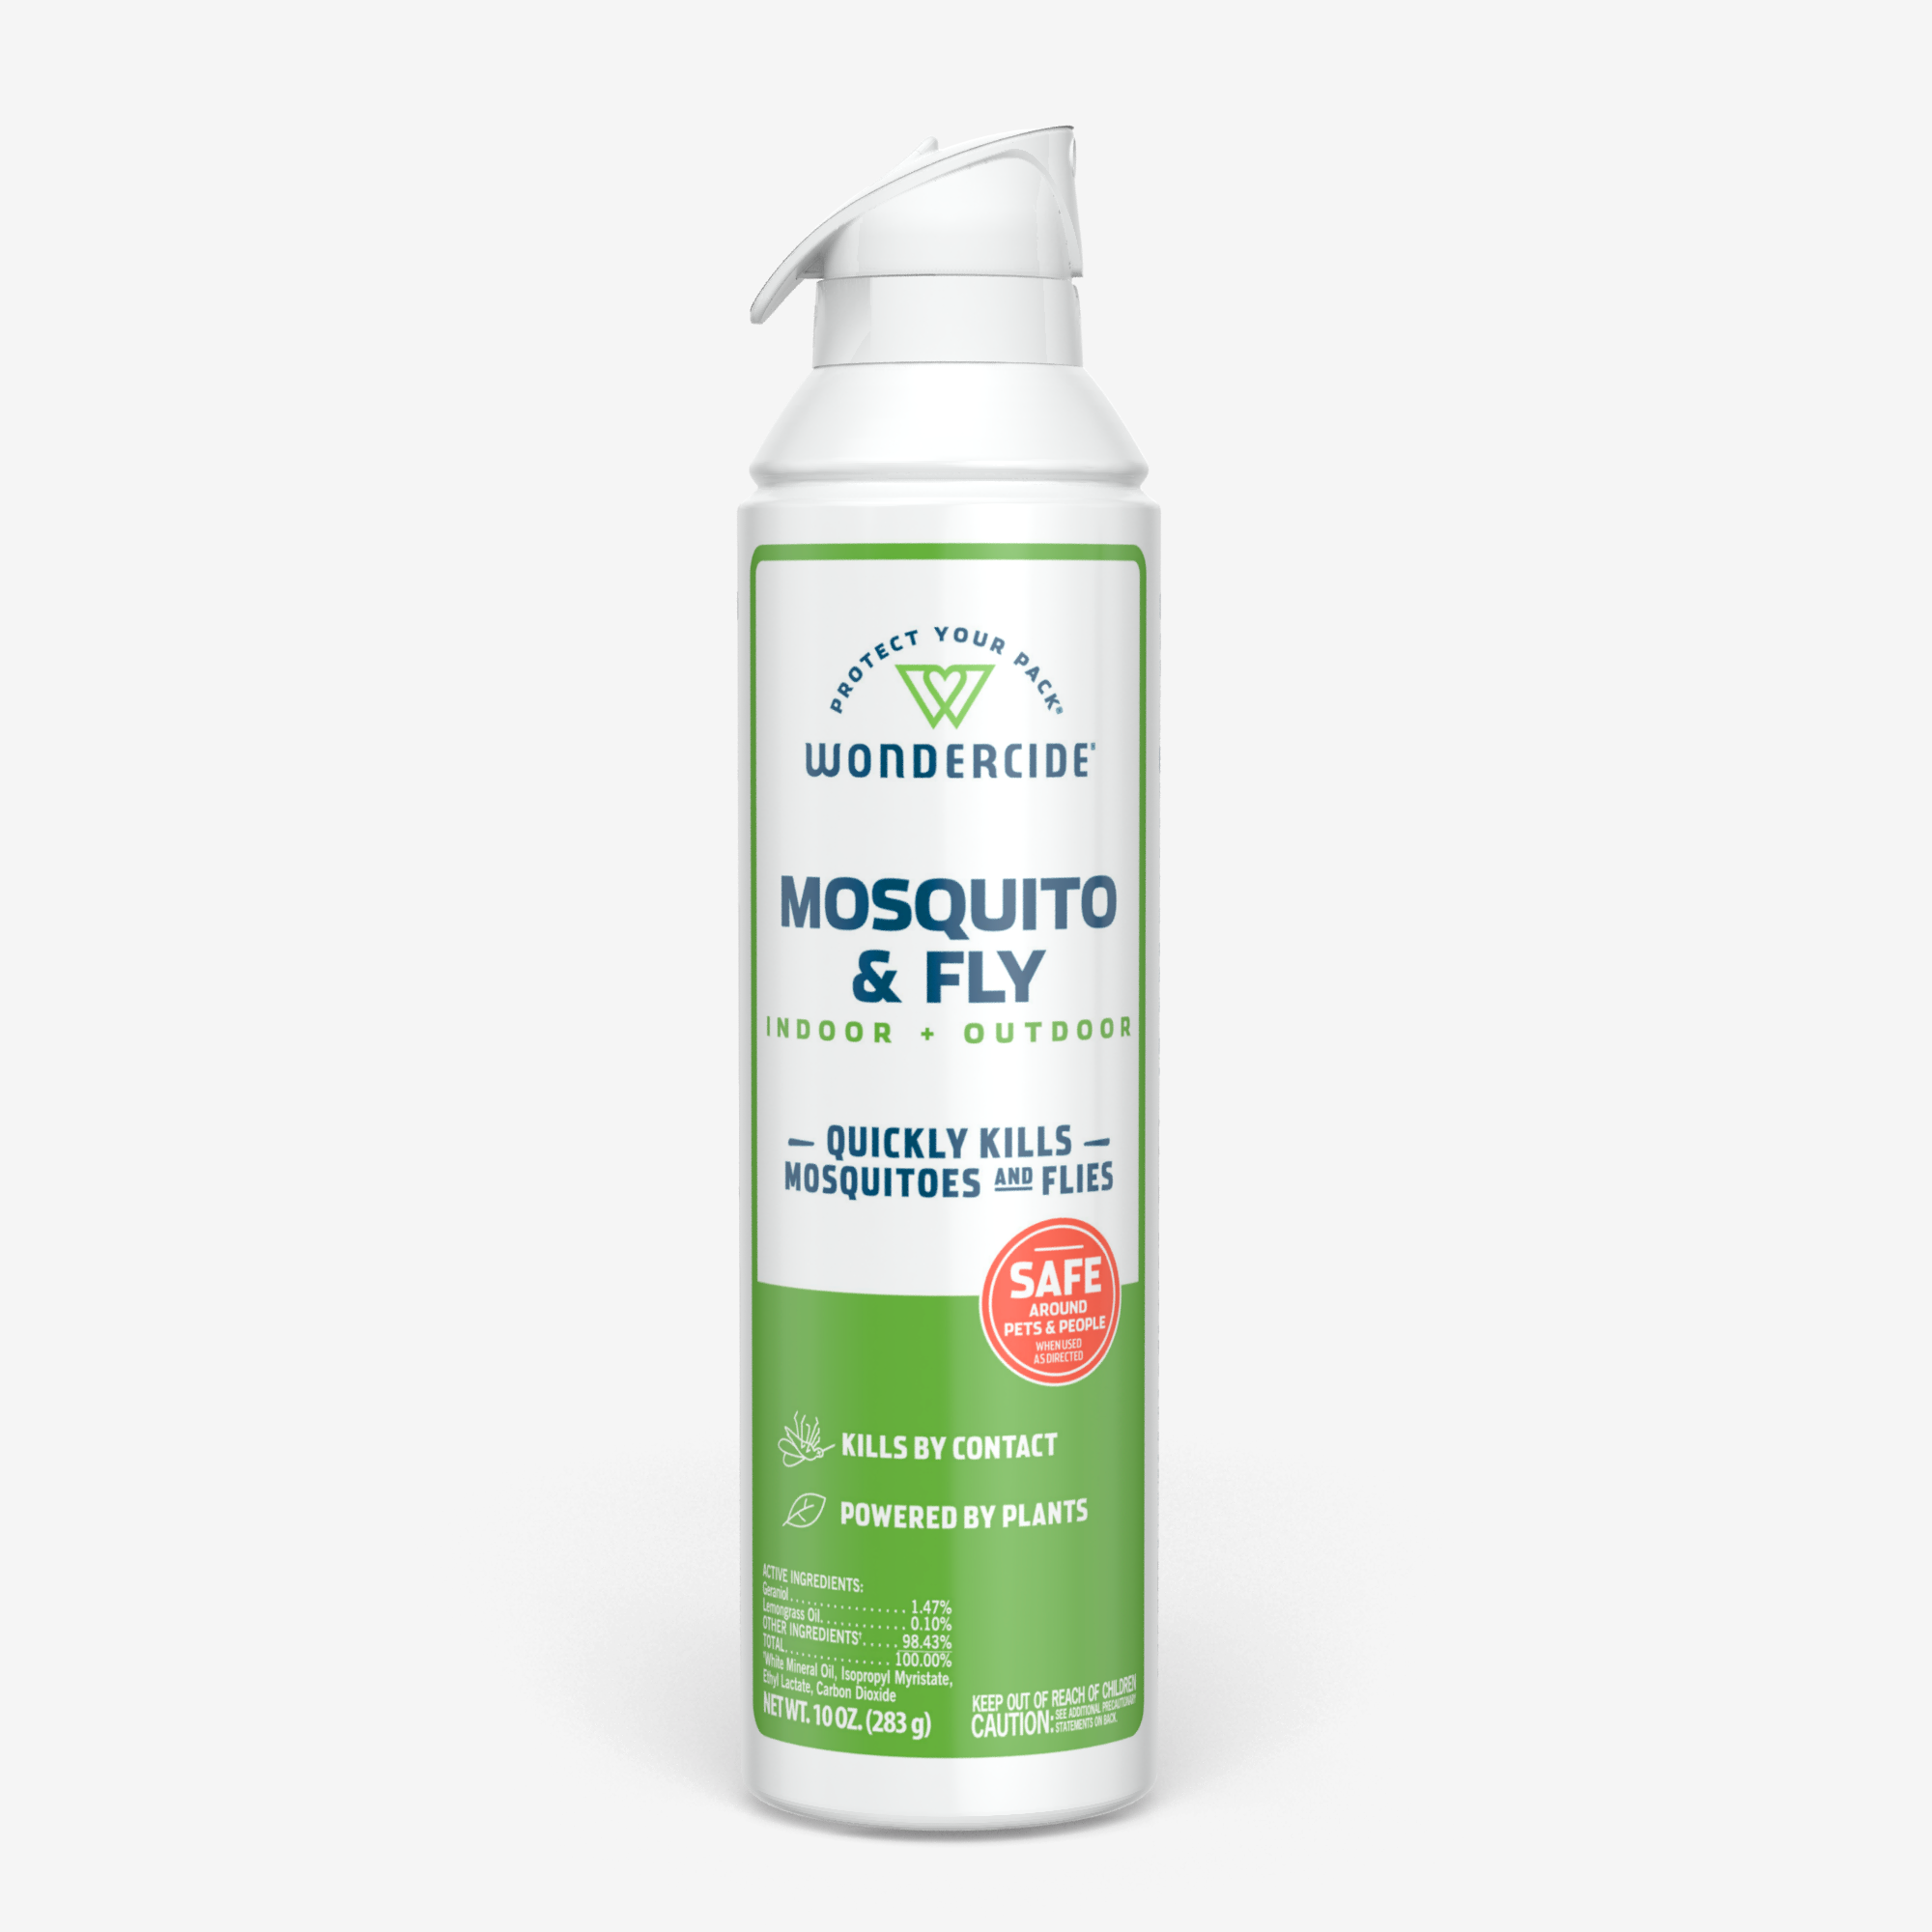 Mosquito & Fly for Indoor + Outdoor with Natural Essential Oils